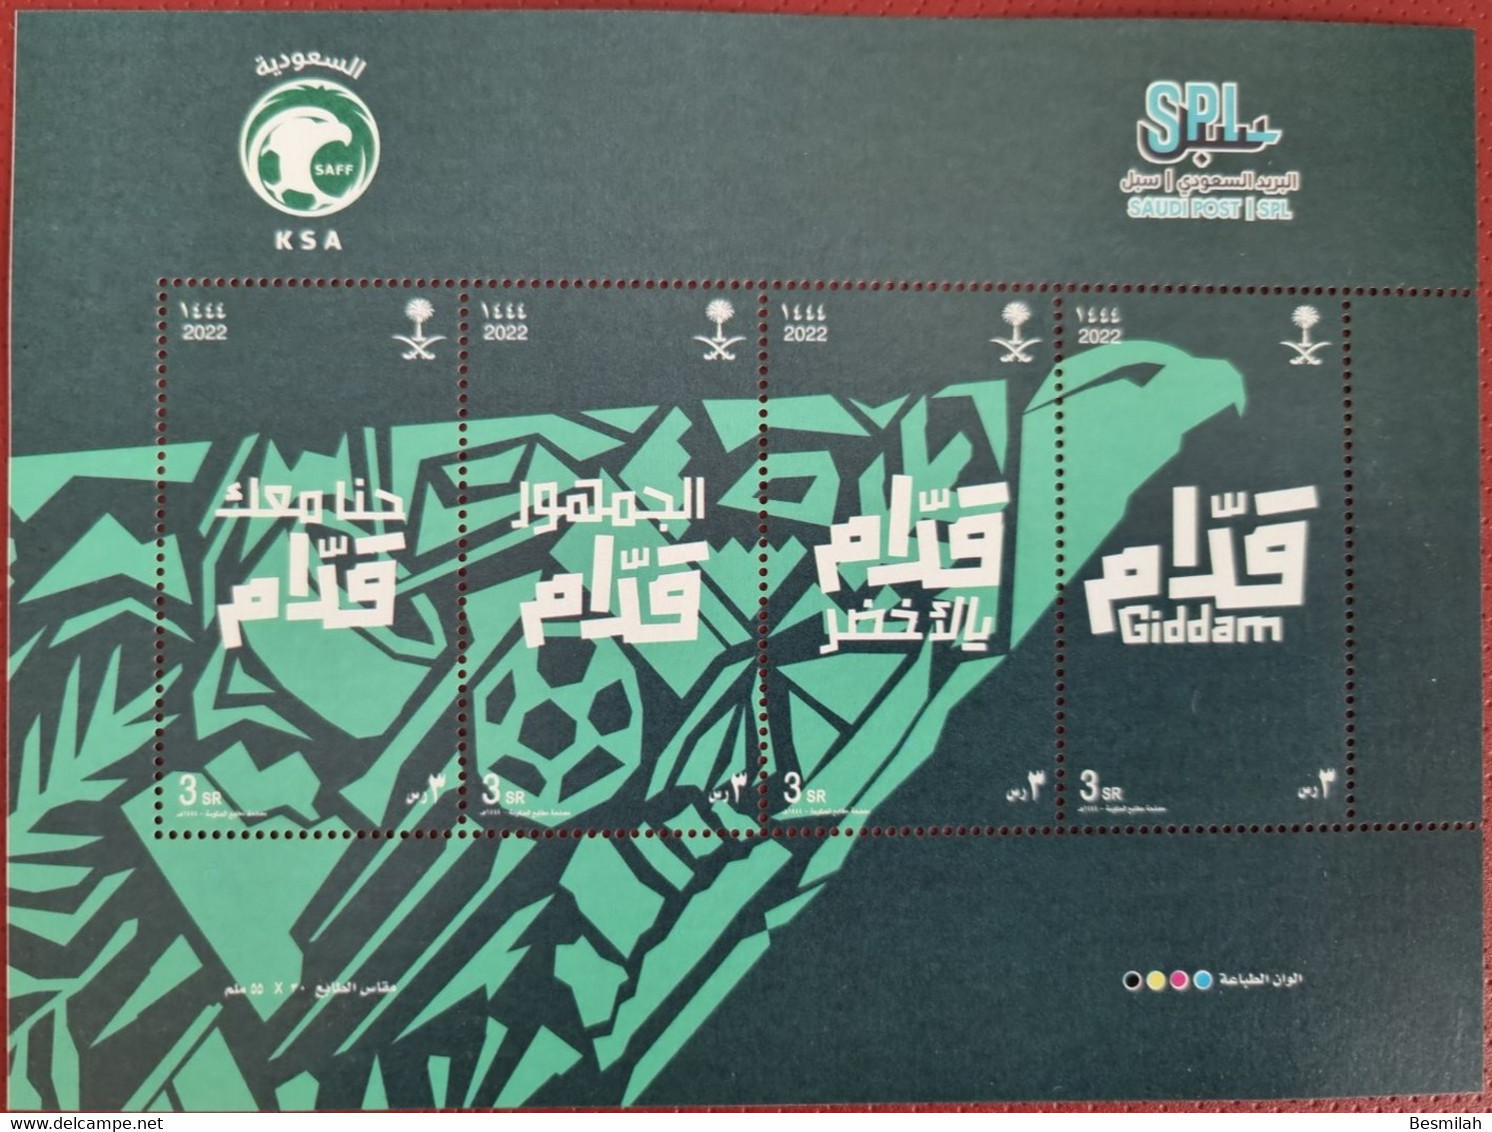 Saudi Arabia Stamp Giddam For Fifa 2022 (1444 Hijry) 8 Pieces Of 3 Riyals With 2 First Day Version Covers + Card - Saudi-Arabien